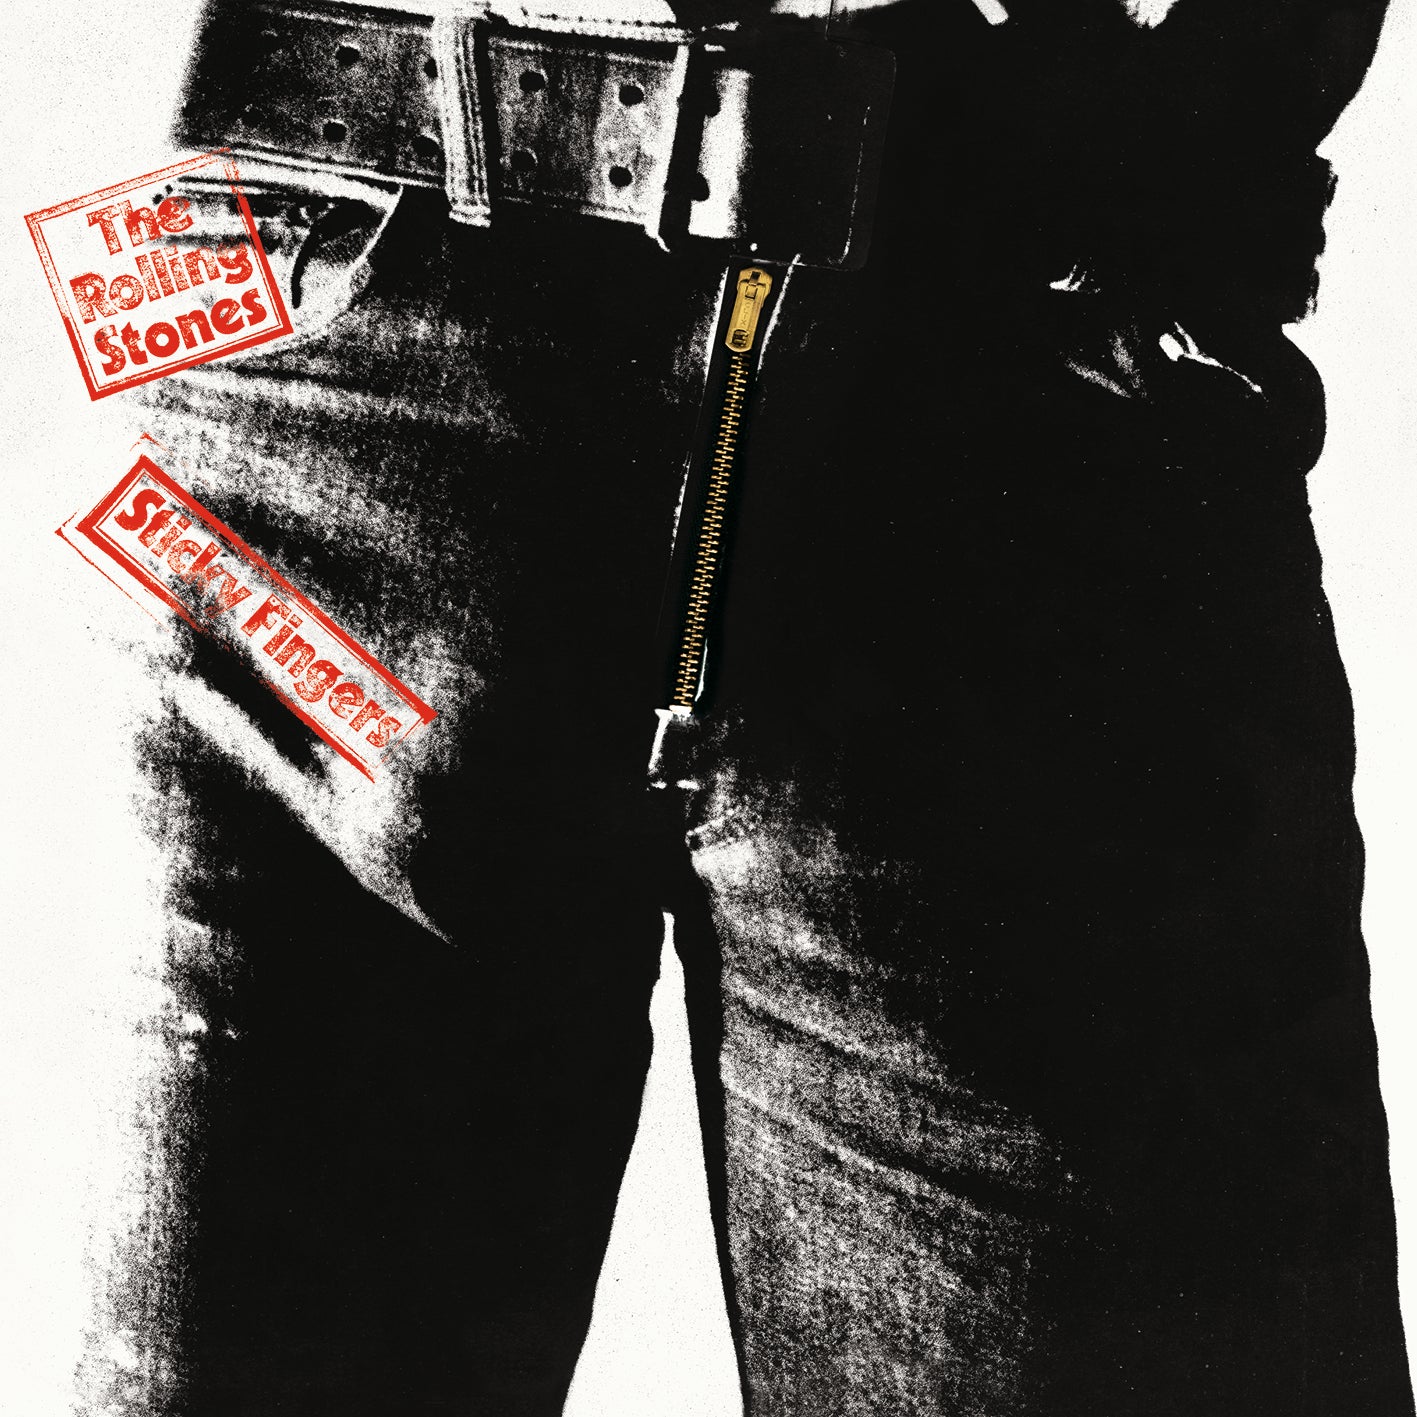 The Rolling Stones - Sticky Fingers Original CD